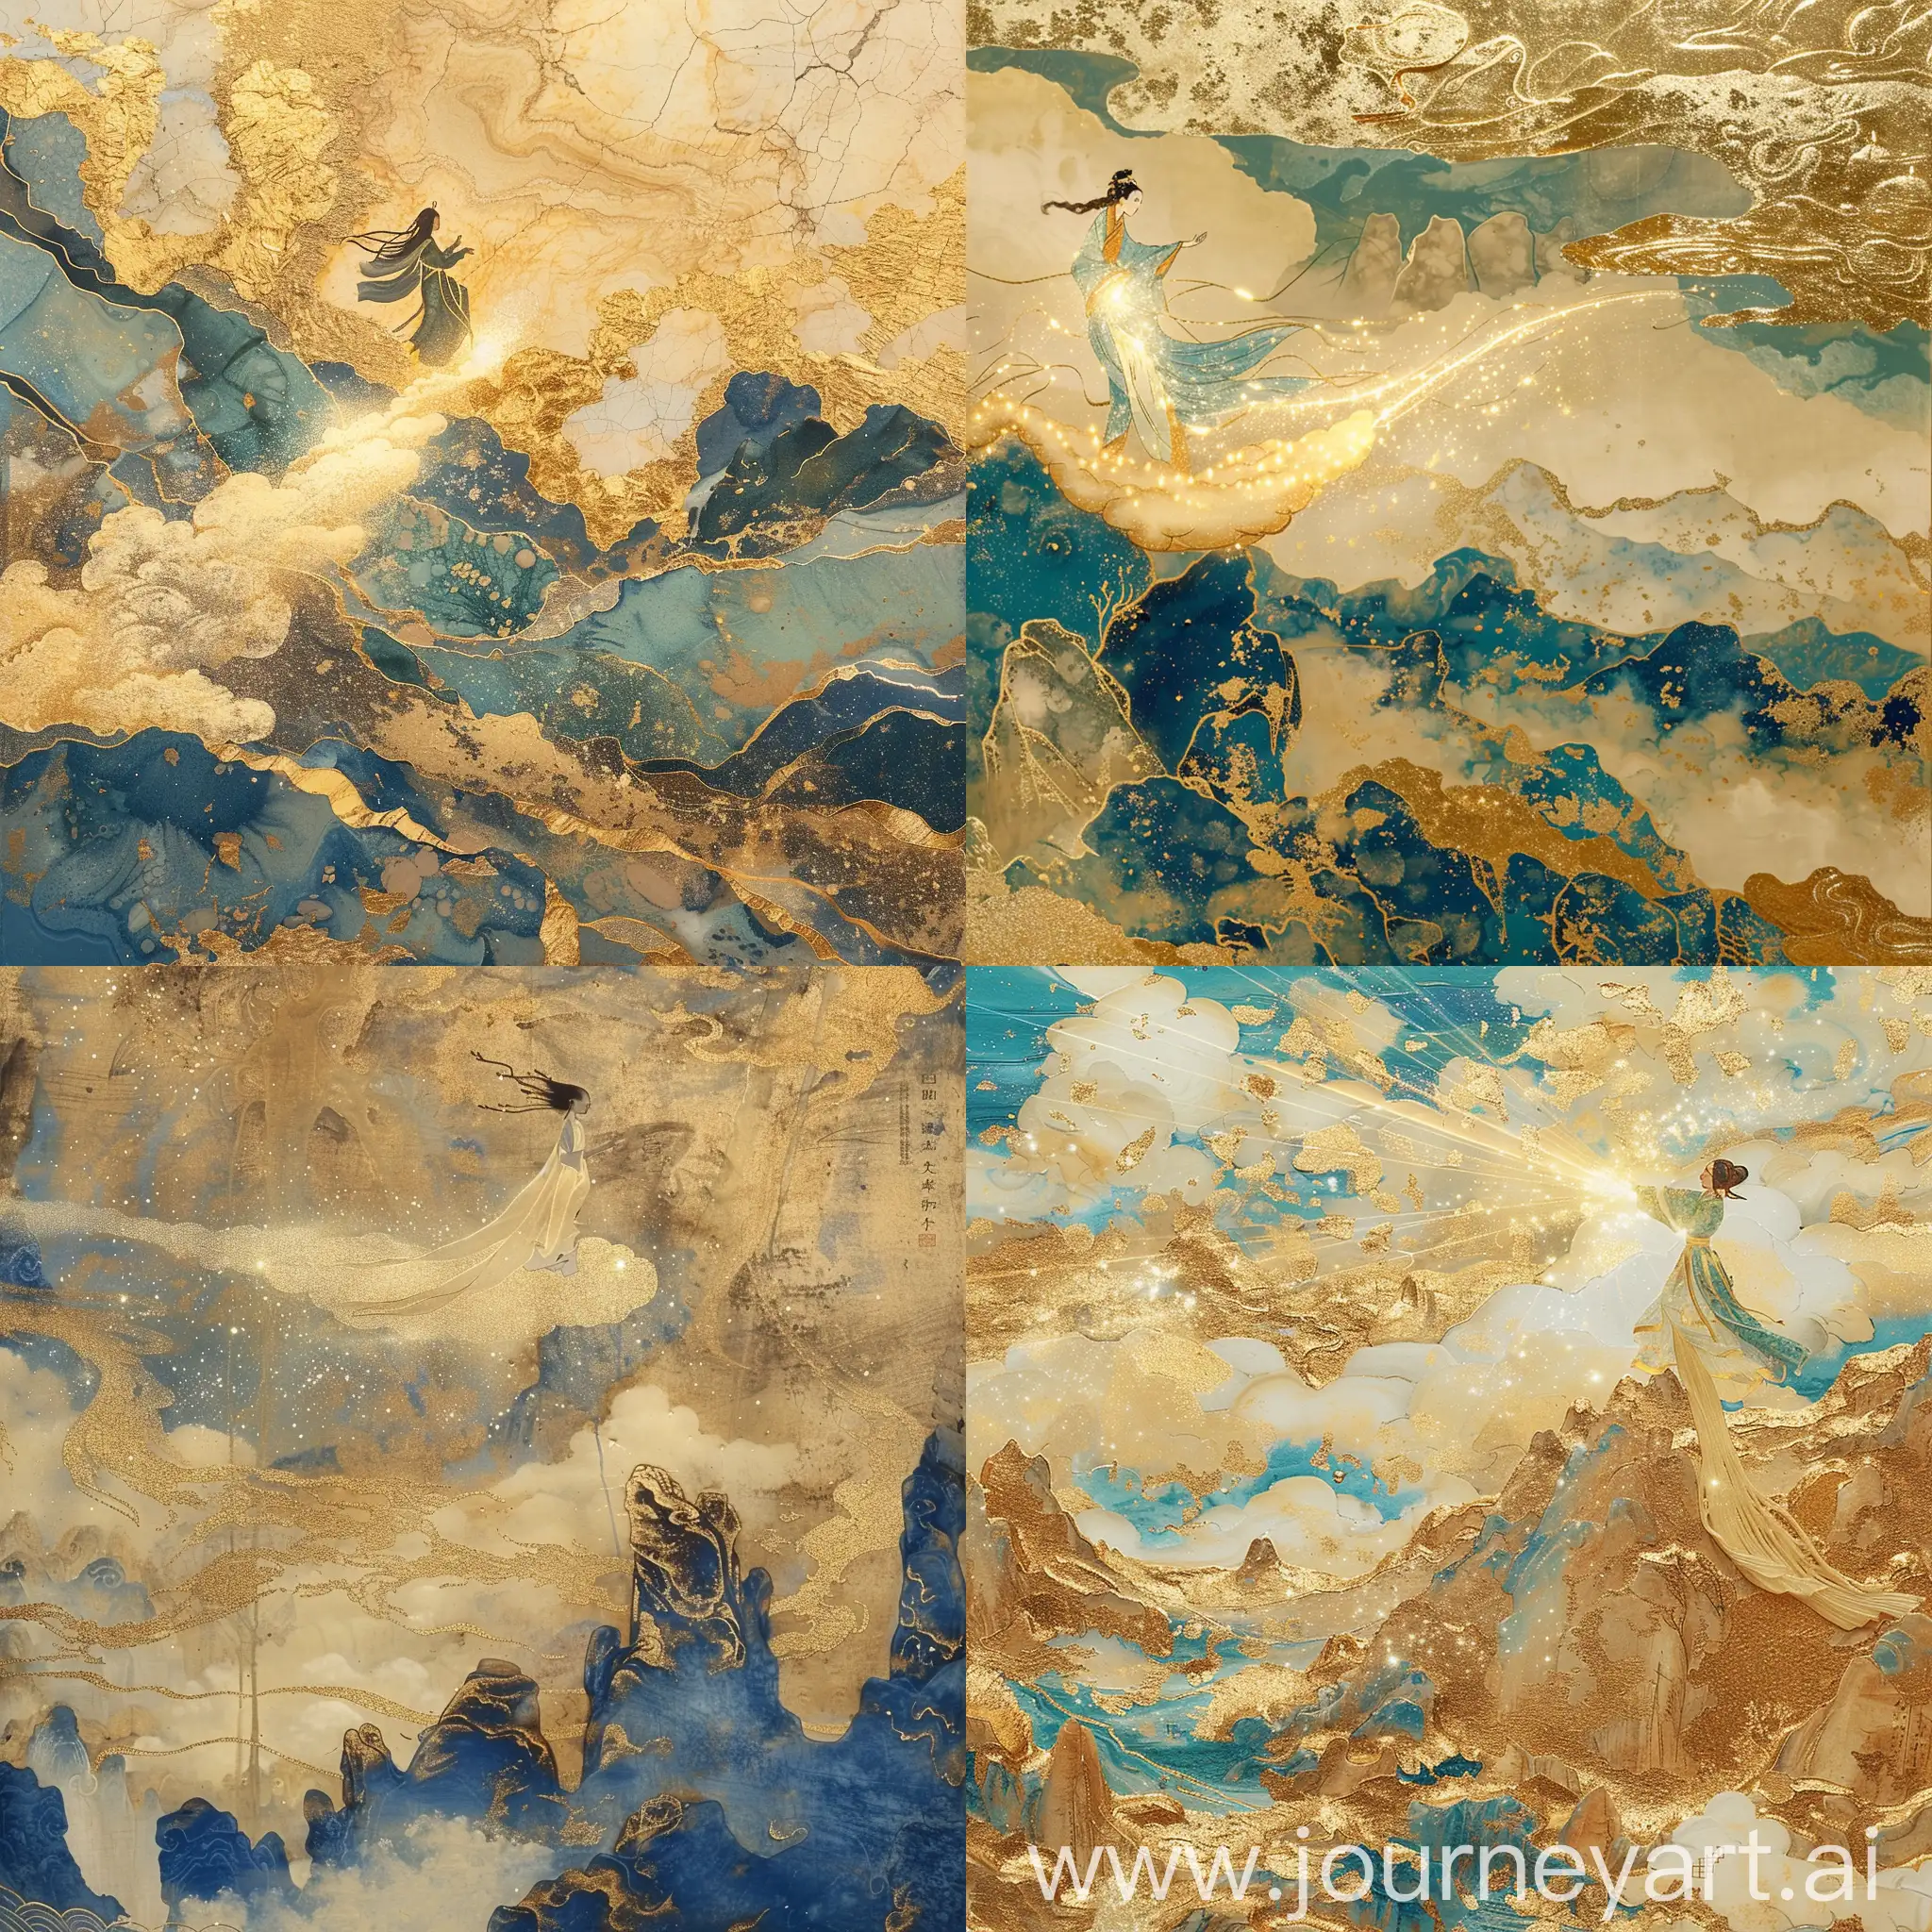 a painting showing a woman on a cloud flying with light, gold leaf art, glitter drawing, Dunhuang-style painting, 1 rock-coloredpainting, Mineral pigmentpainting, decorous Texture sensationGold foil texture, in the style of richly detailed art nouveau, Chinese culture, northern china's terrain, gold and blue, mind-bending murals, trompe-l'œil illusionistic detail